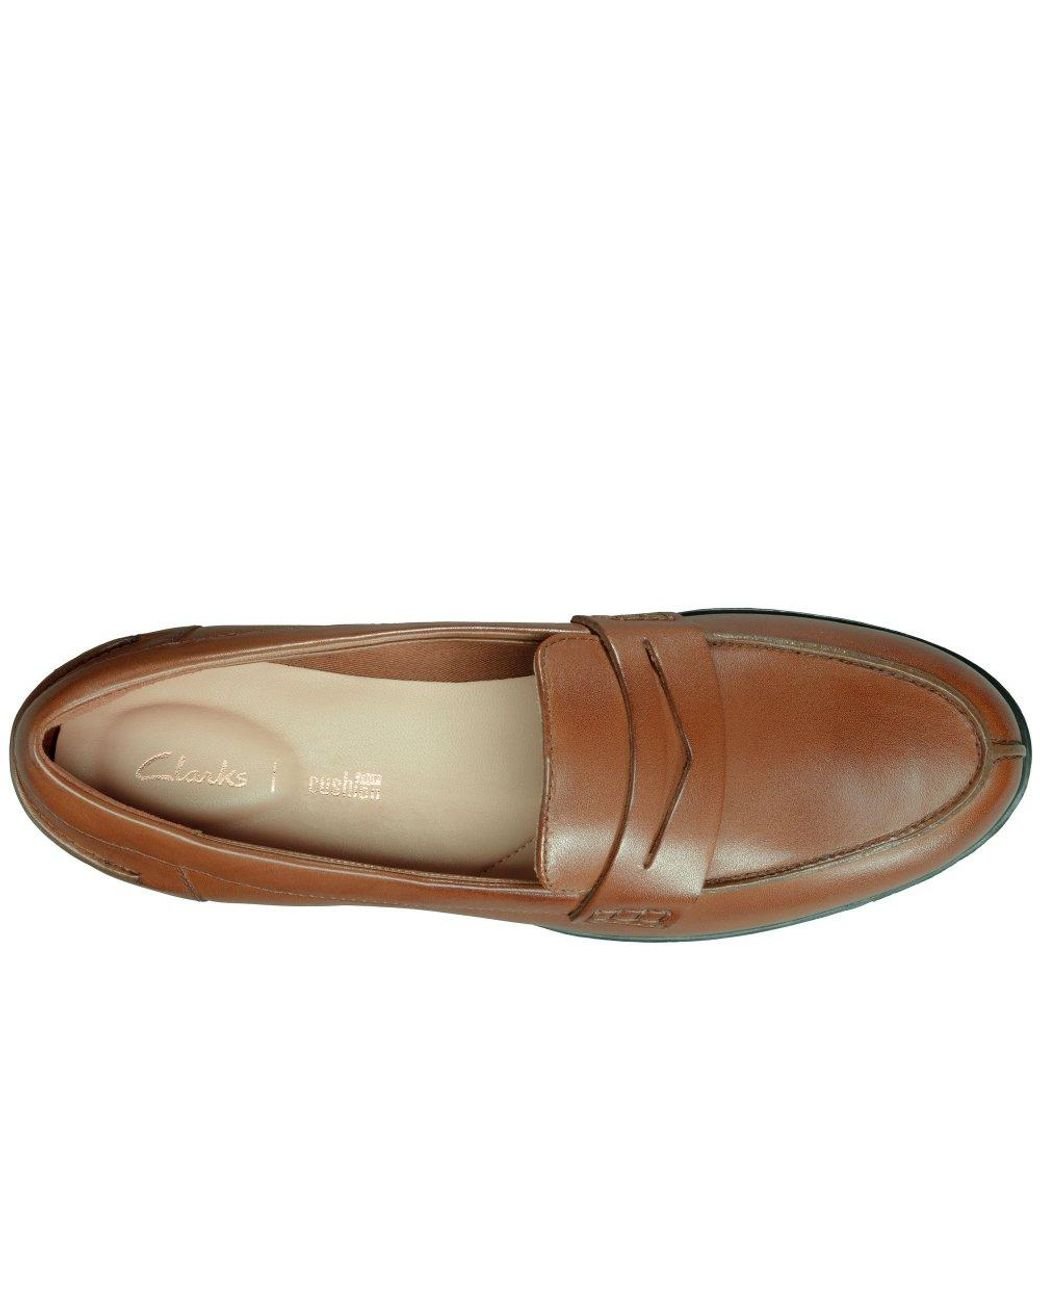 Clarks Leather Hamble Loafer Wide Fit Shoes in Tan (Brown) | Lyst Canada